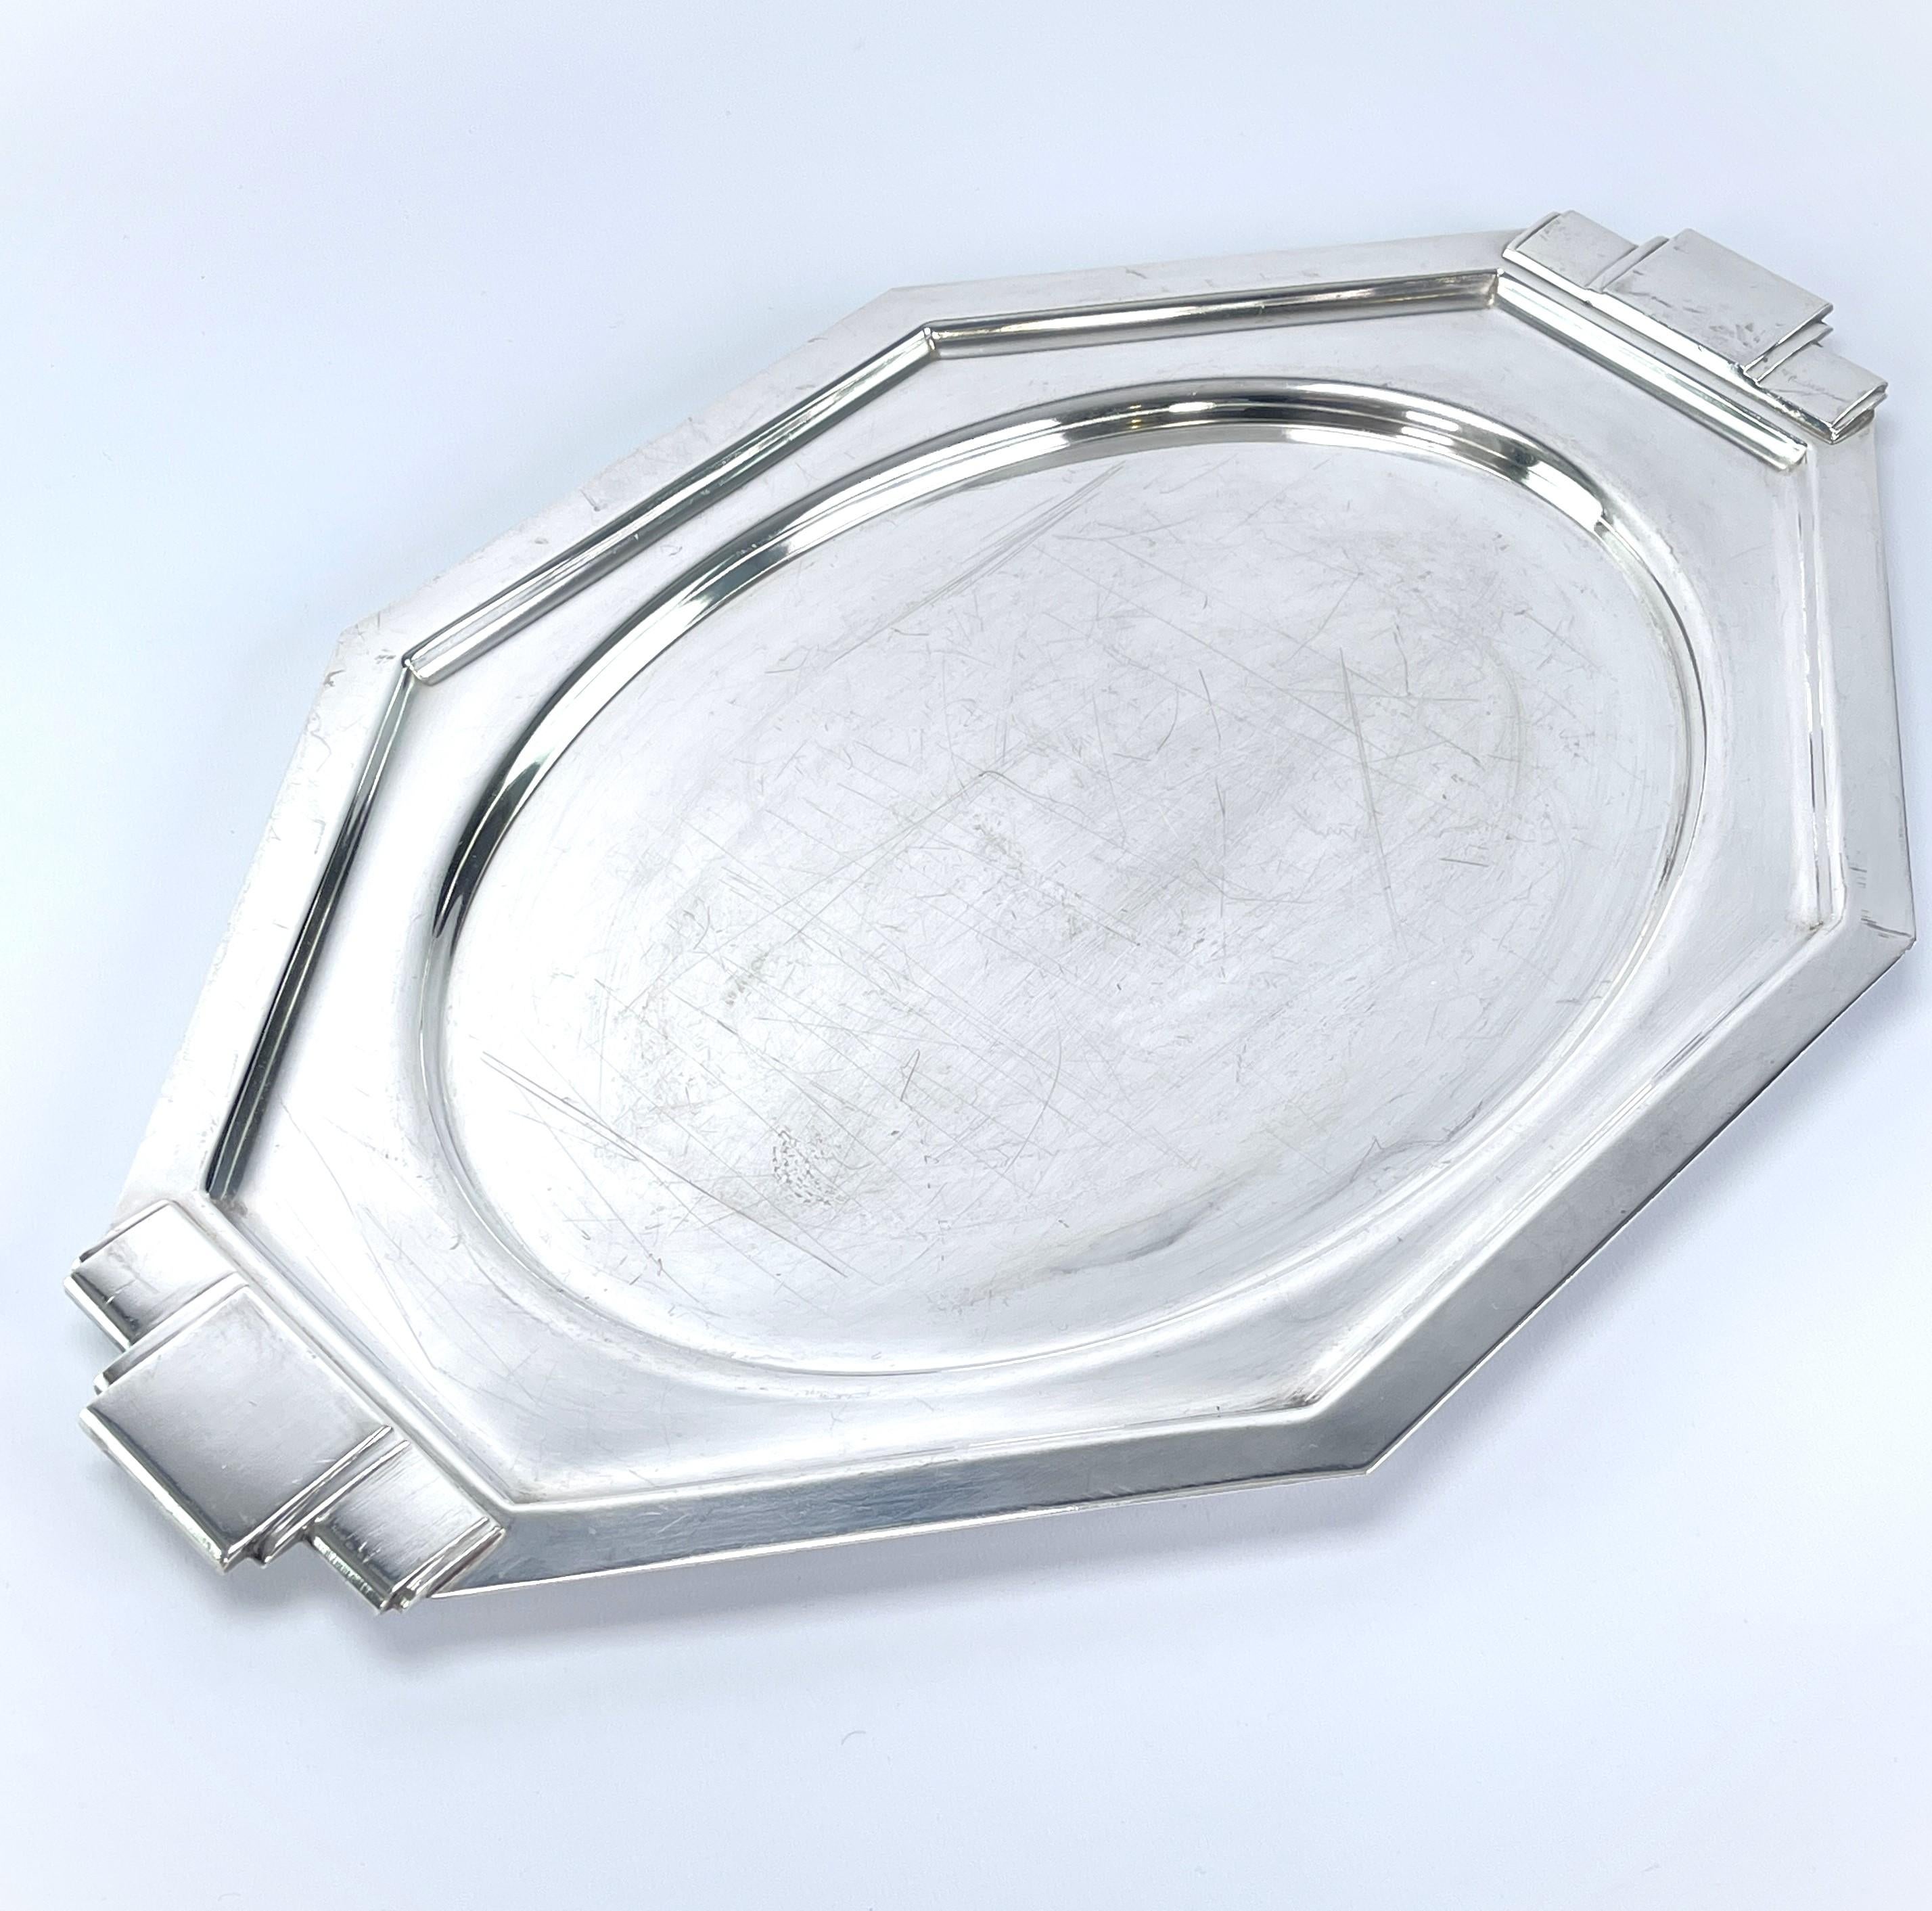 ART DECO Tray silver plated, 1930s

This beautiful, silver-plated tray from the 1920s is in the streamline modern Art Deco style. This style emphasised curvy, streamlined shapes. The tray still impresses with its beautiful shape.
The tray is marked.